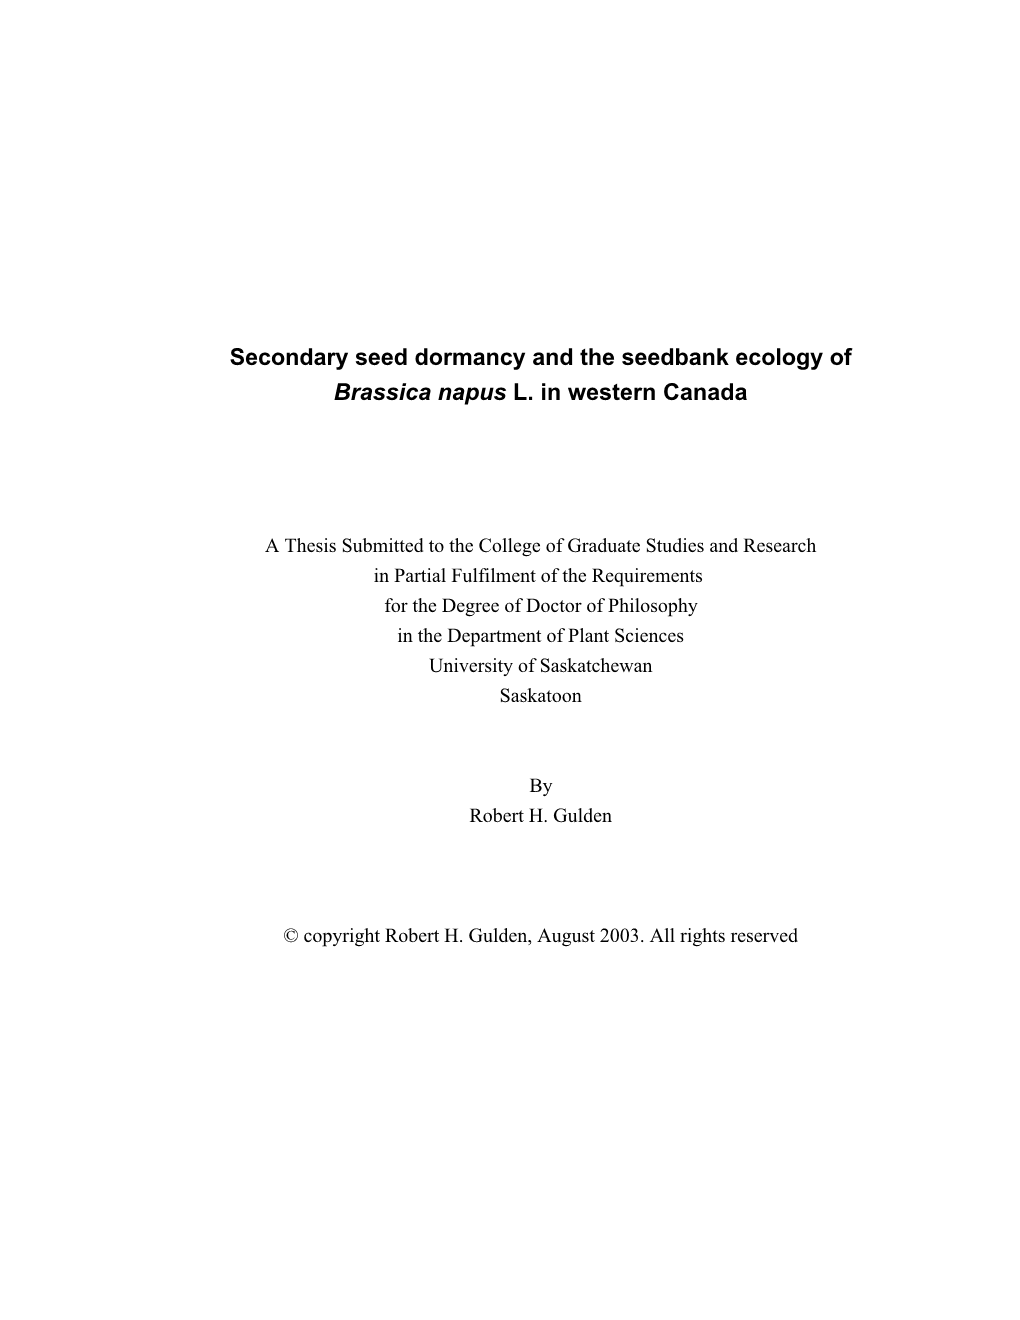 Secondary Seed Dormancy and the Seedbank Ecology of Brassica Napus L